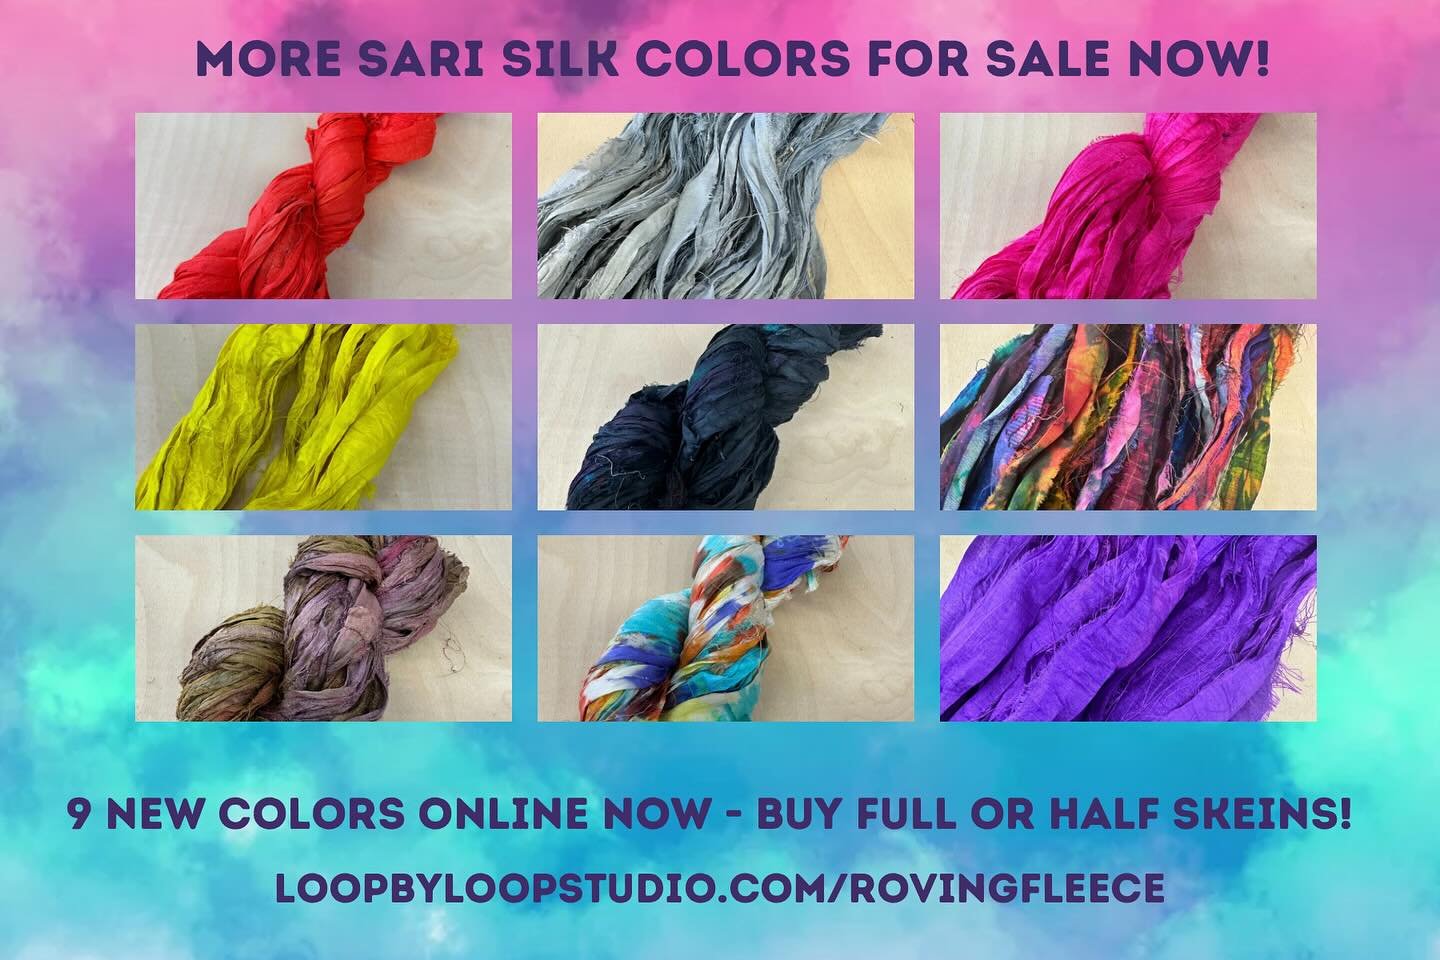 We have some great new options for Sari Silk ribbons on the site now! In addition to Neons, we have Chai Latte, Autumn Ravelry, Tie Dye Gems, and more! #rughooking #rugmaking #rughookersofinstagram #fiberart #fiberartist #punchneedle #rughookingartis